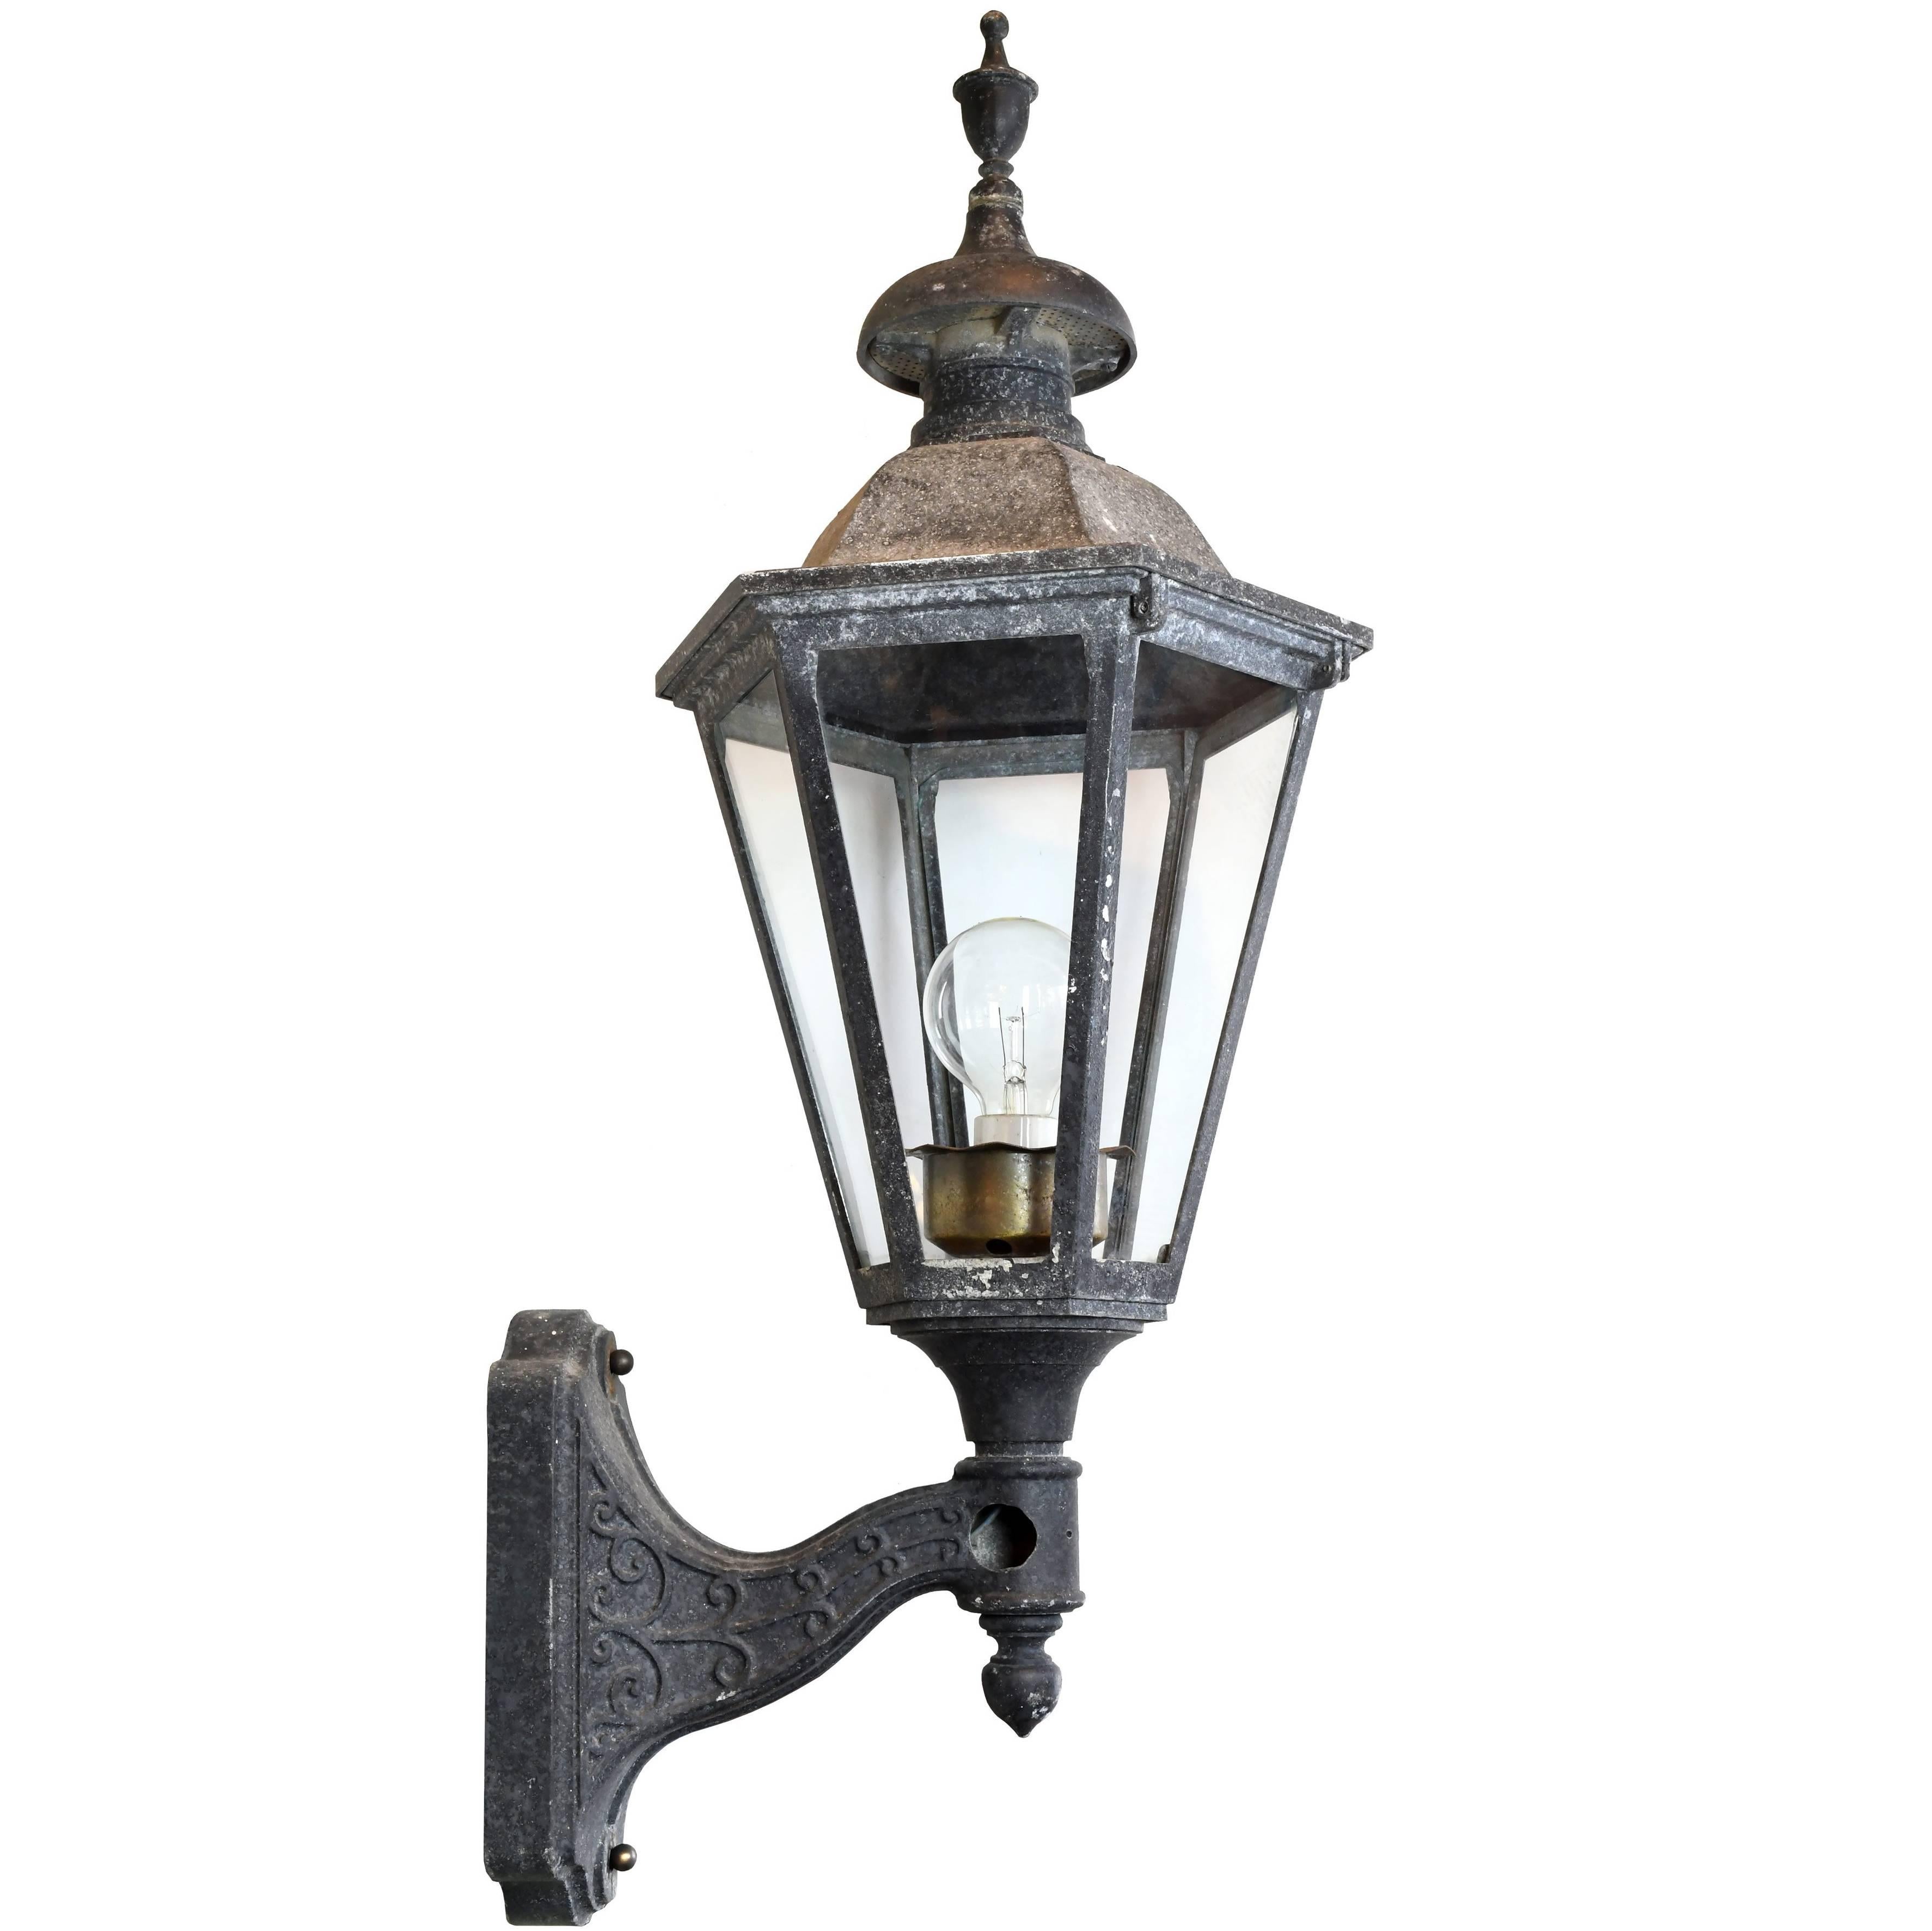 This large exterior sconce features spiraling, vine-like patterns on the arm, six-sided glass panels and textured patina throughout. This striking sconce is sure to make a statement outside any entrance.

circa 1925
Condition: Good
Finish: